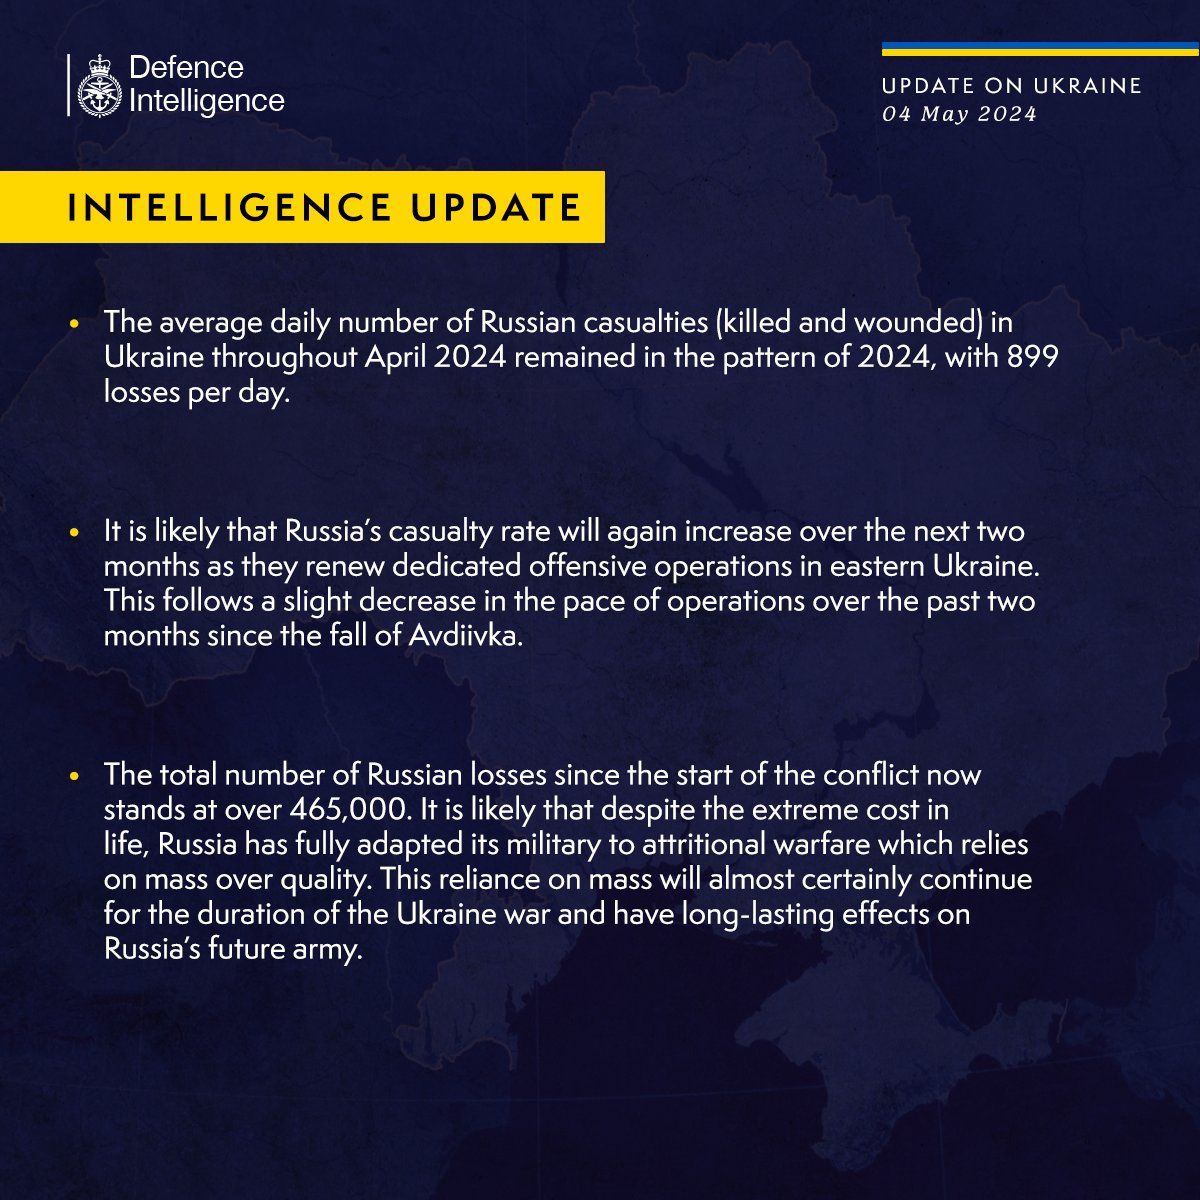 Latest Defence Intelligence update on the situation in Ukraine – 04 May 2024. Find out more about Defence Intelligence's use of language: ow.ly/cF7050RwpHl #StandWithUkraine 🇺🇦